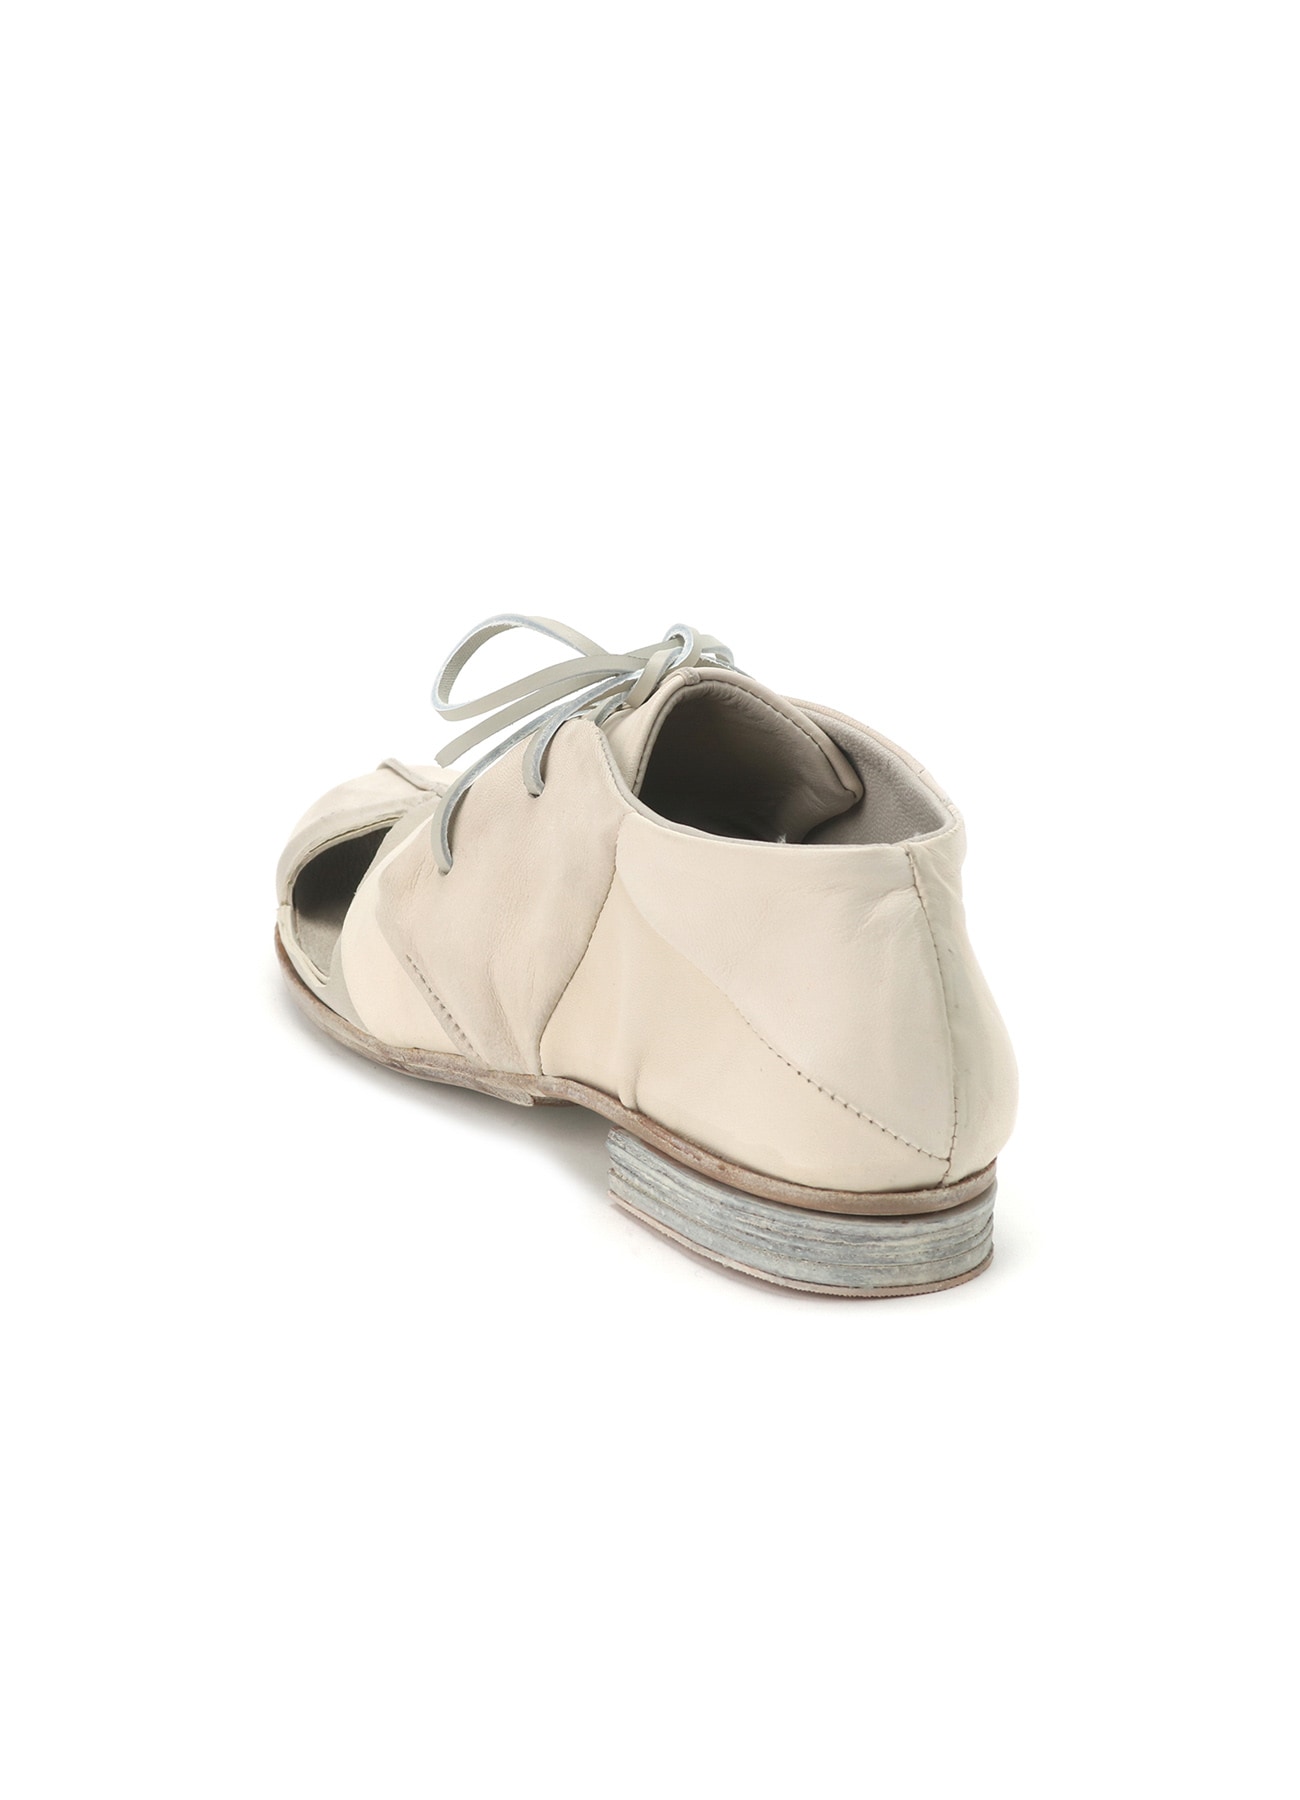 WHITE GOAT LEATHER PATCHWORK SHOES